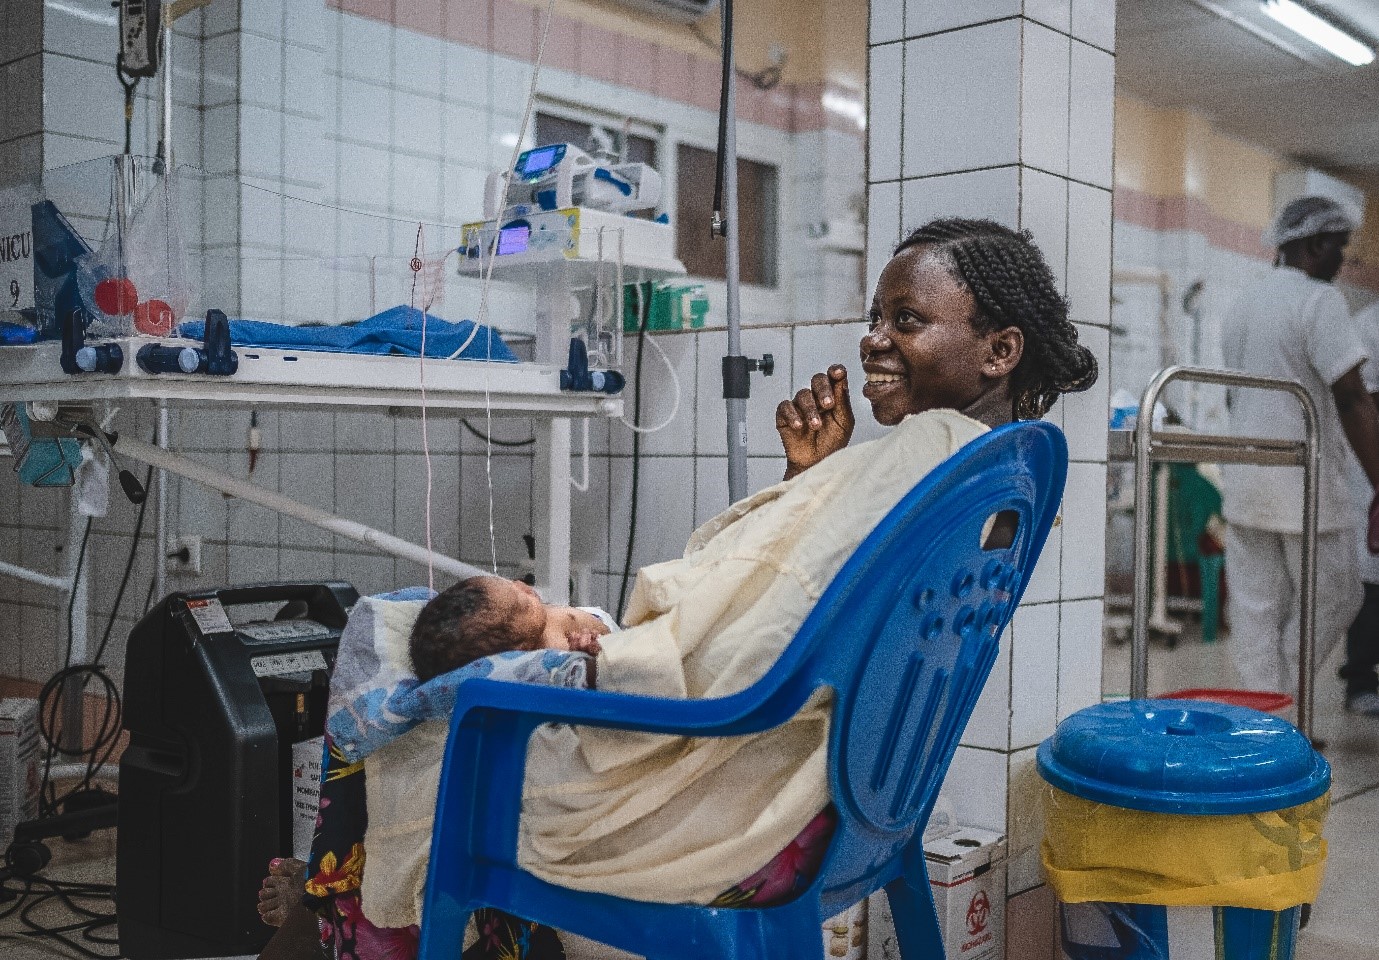 Ebokossi Benicia, 15, with her first child born prematurely at 36 weeks gestation and suffering from respiratory problems. The child is cared for at the intensive care unit of the MSF-supported neonatal emergency department, Centre Hospitalier Communautaire (CHUC), Bangui, Central African Republic, October 24, 2022 - ©MSF